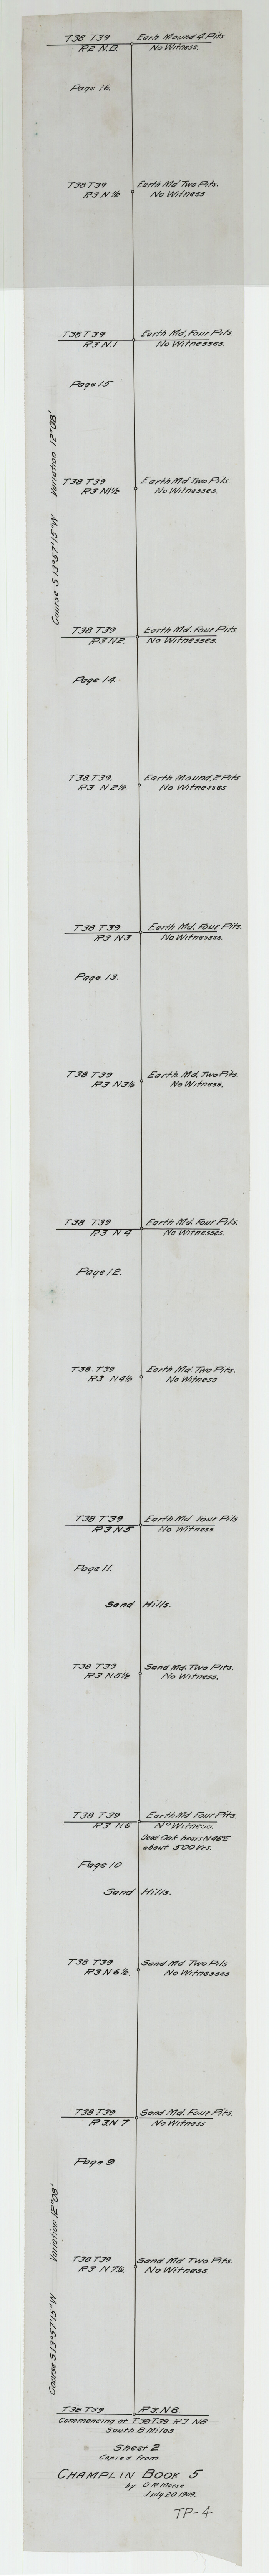 93178, Sheet 2 copied from Champlin Book 5 [Strip Map showing T. & P. connecting lines], Twichell Survey Records